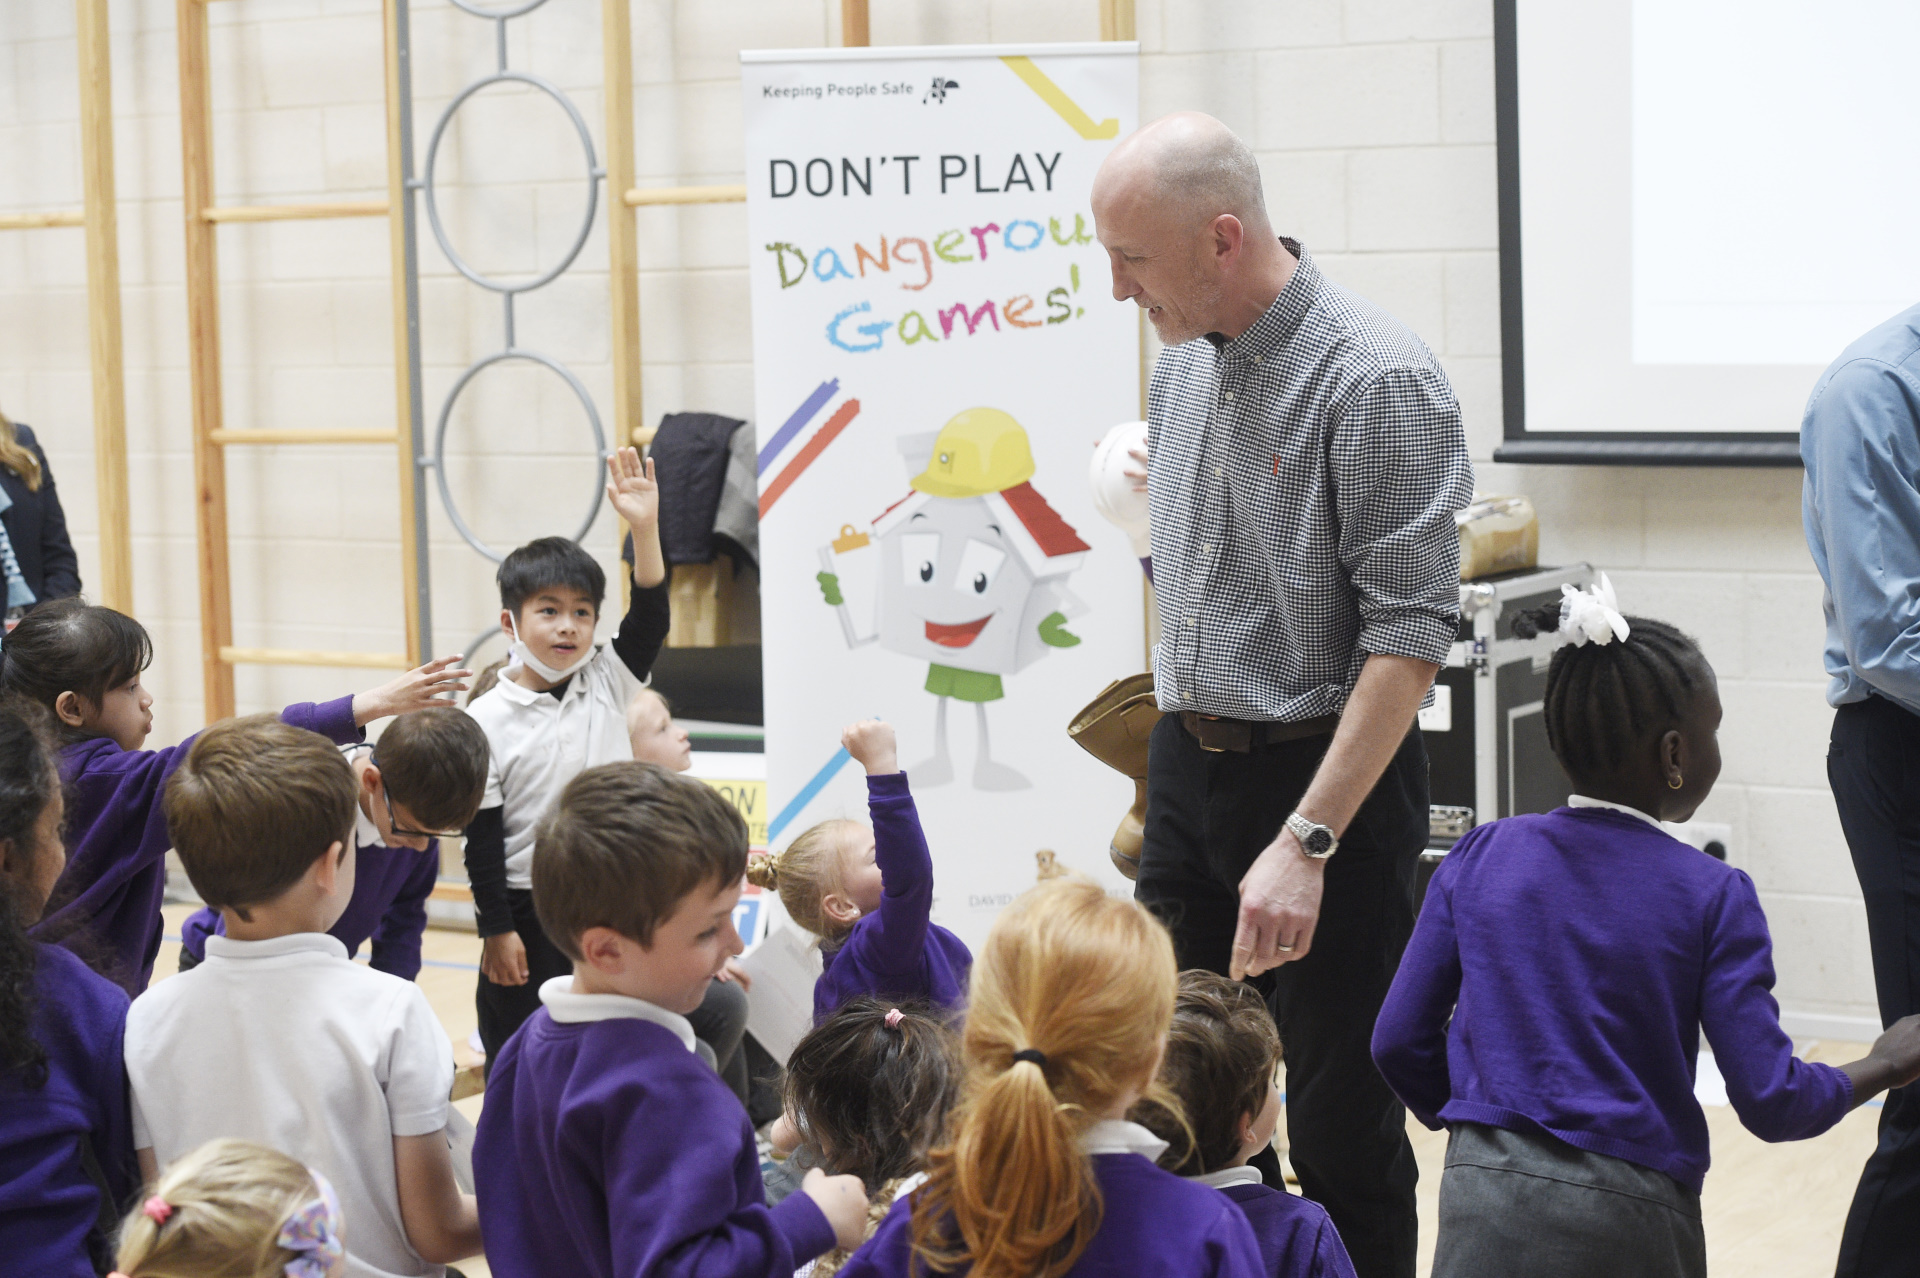 Youngsters learn how to stay safe near Edinburgh site